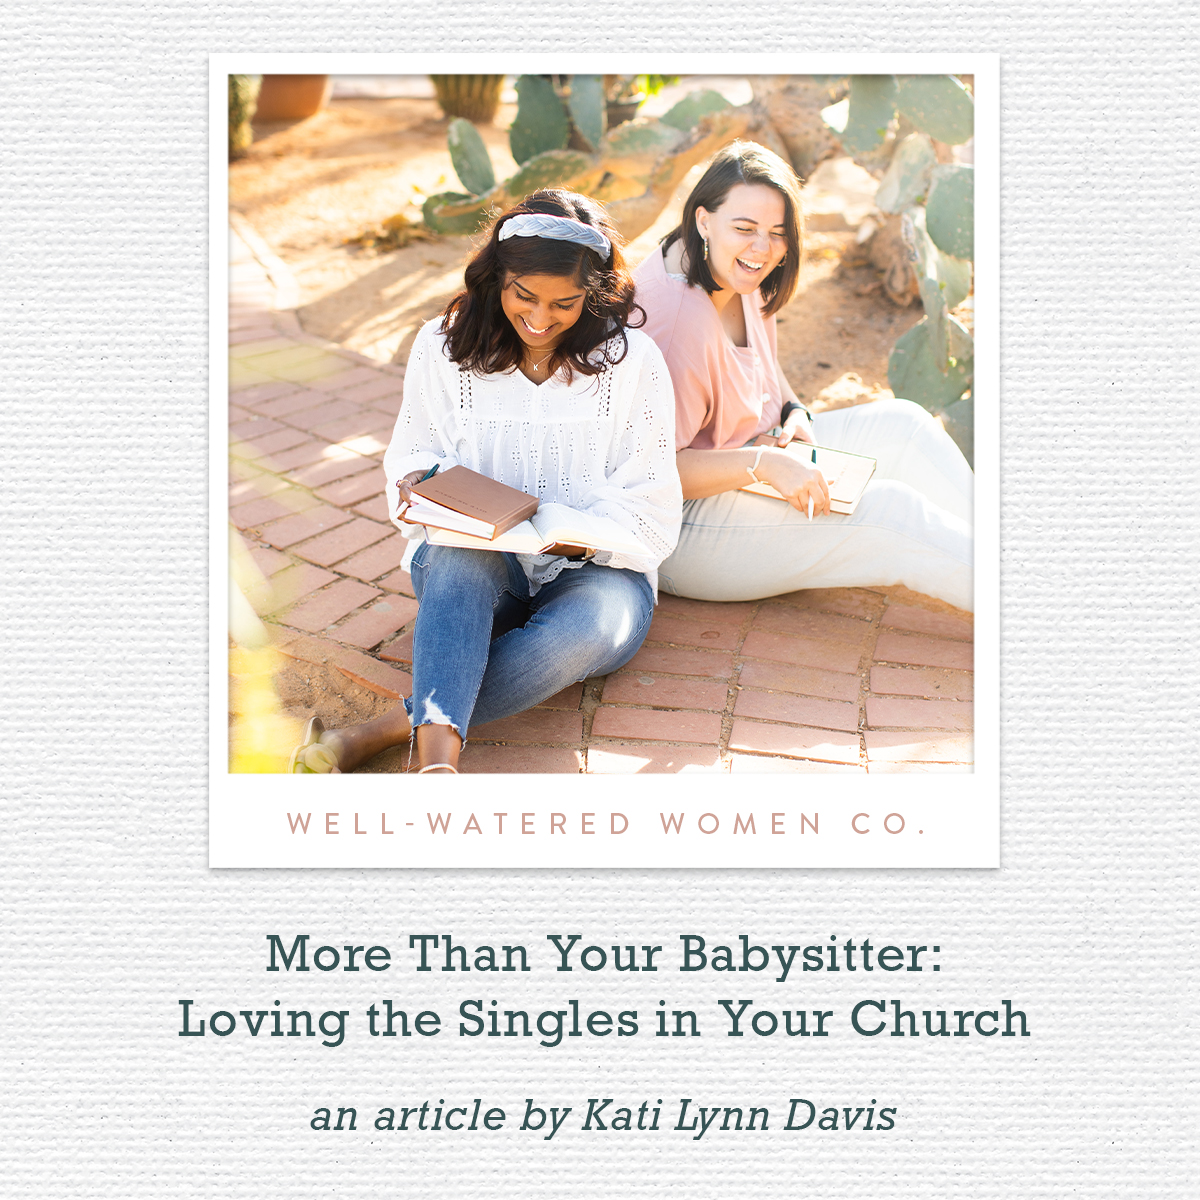 More Than Your Babysitter, Loving Singles in Your Church - an Article from Well-Watered Women